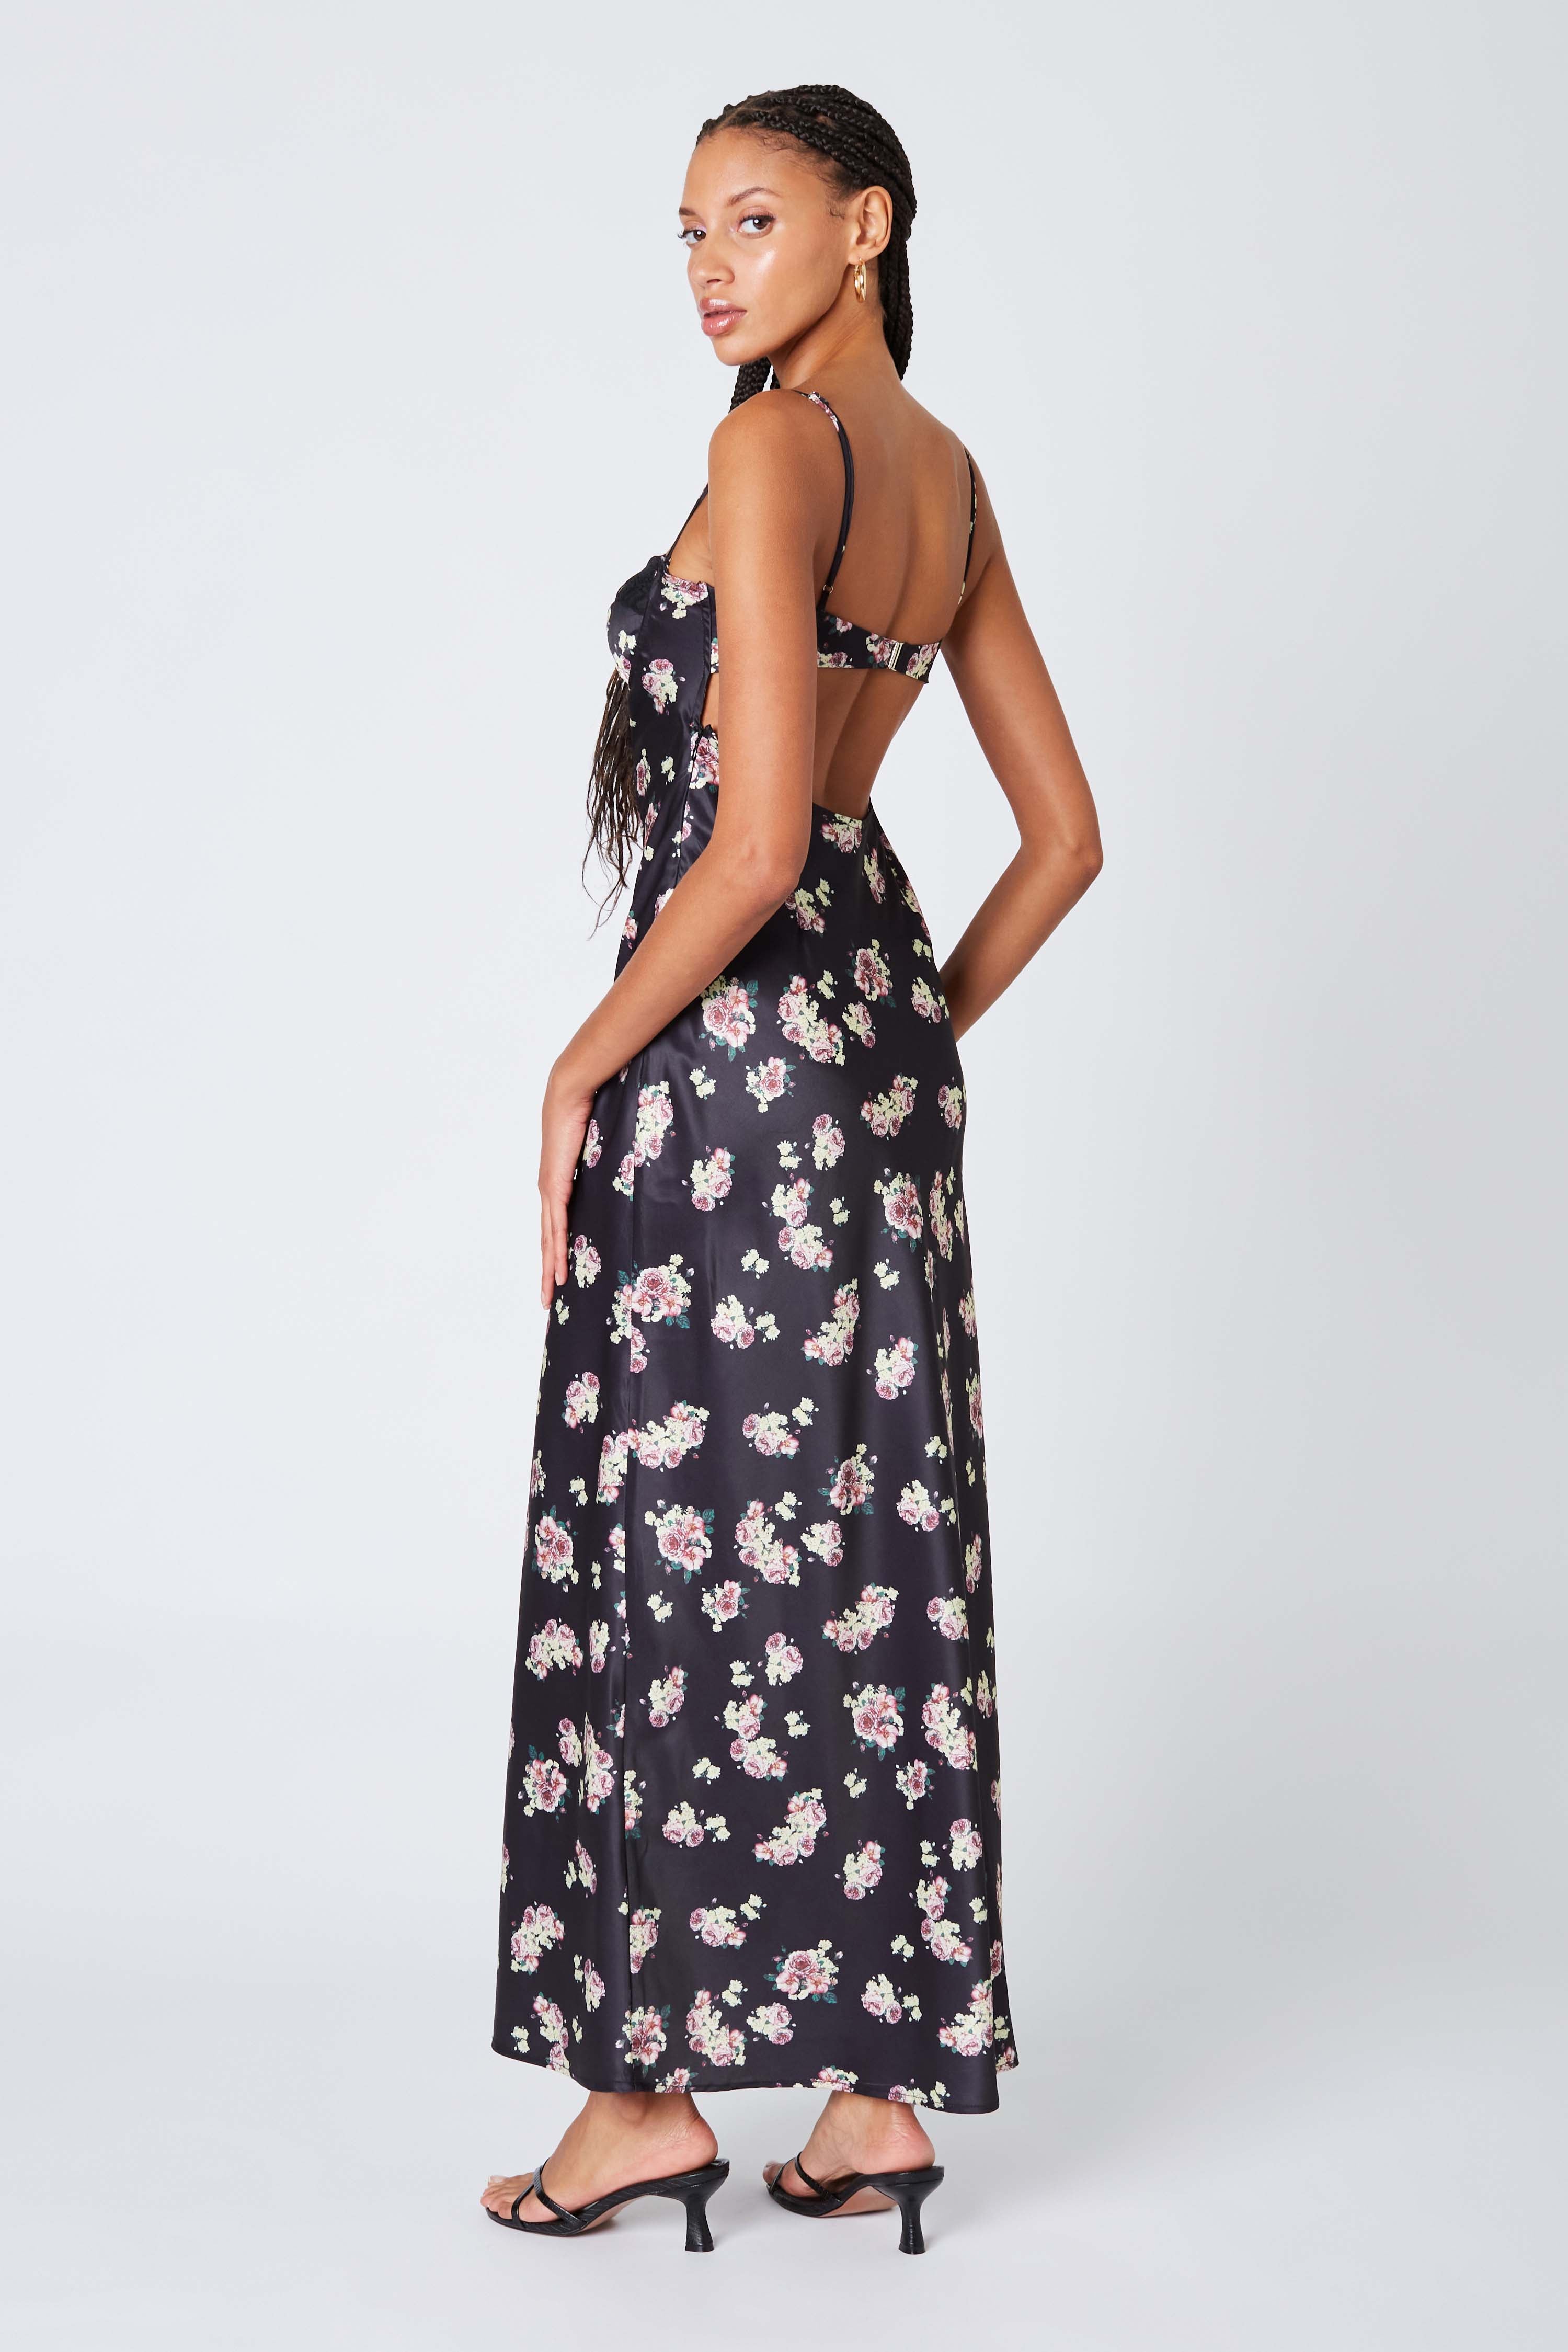 Corset Floral Maxi Dress in Black Back View